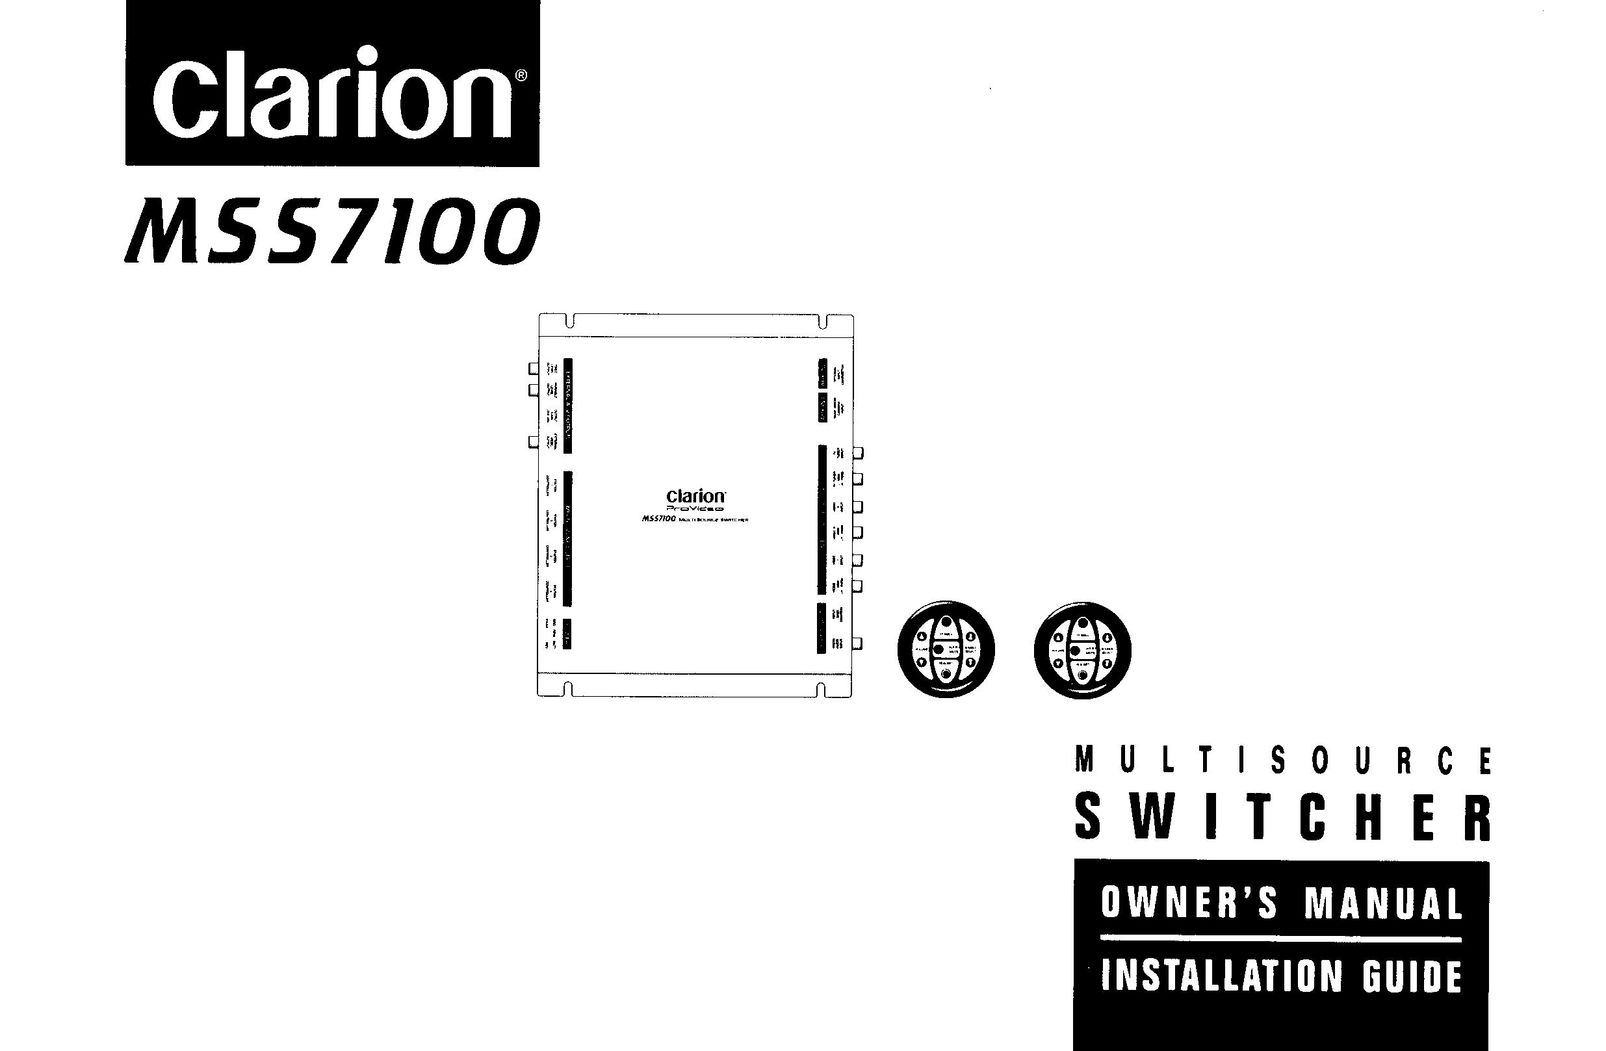 Clarion MSS7100 Switch User Manual